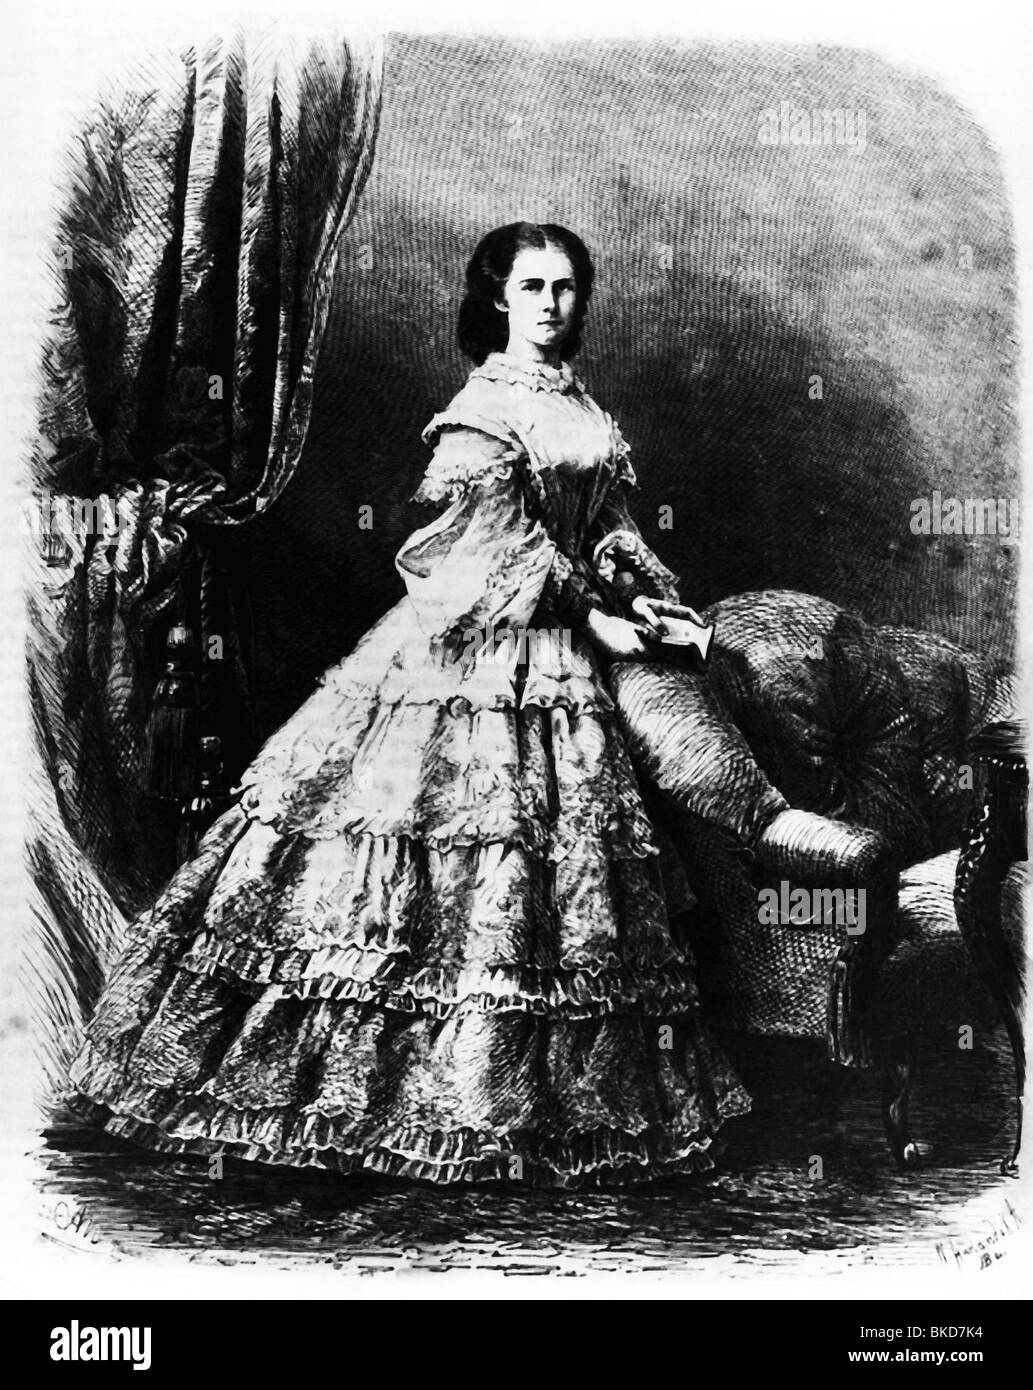 Elisabeth Amalie of Bavaria, 24.12.1837 - 10.9.1898, Empress consort of Austria since 24.4.1854, Queen consort of Hungary, called 'Sisi', full length, wood engraving, by W. Aurland, Stock Photo